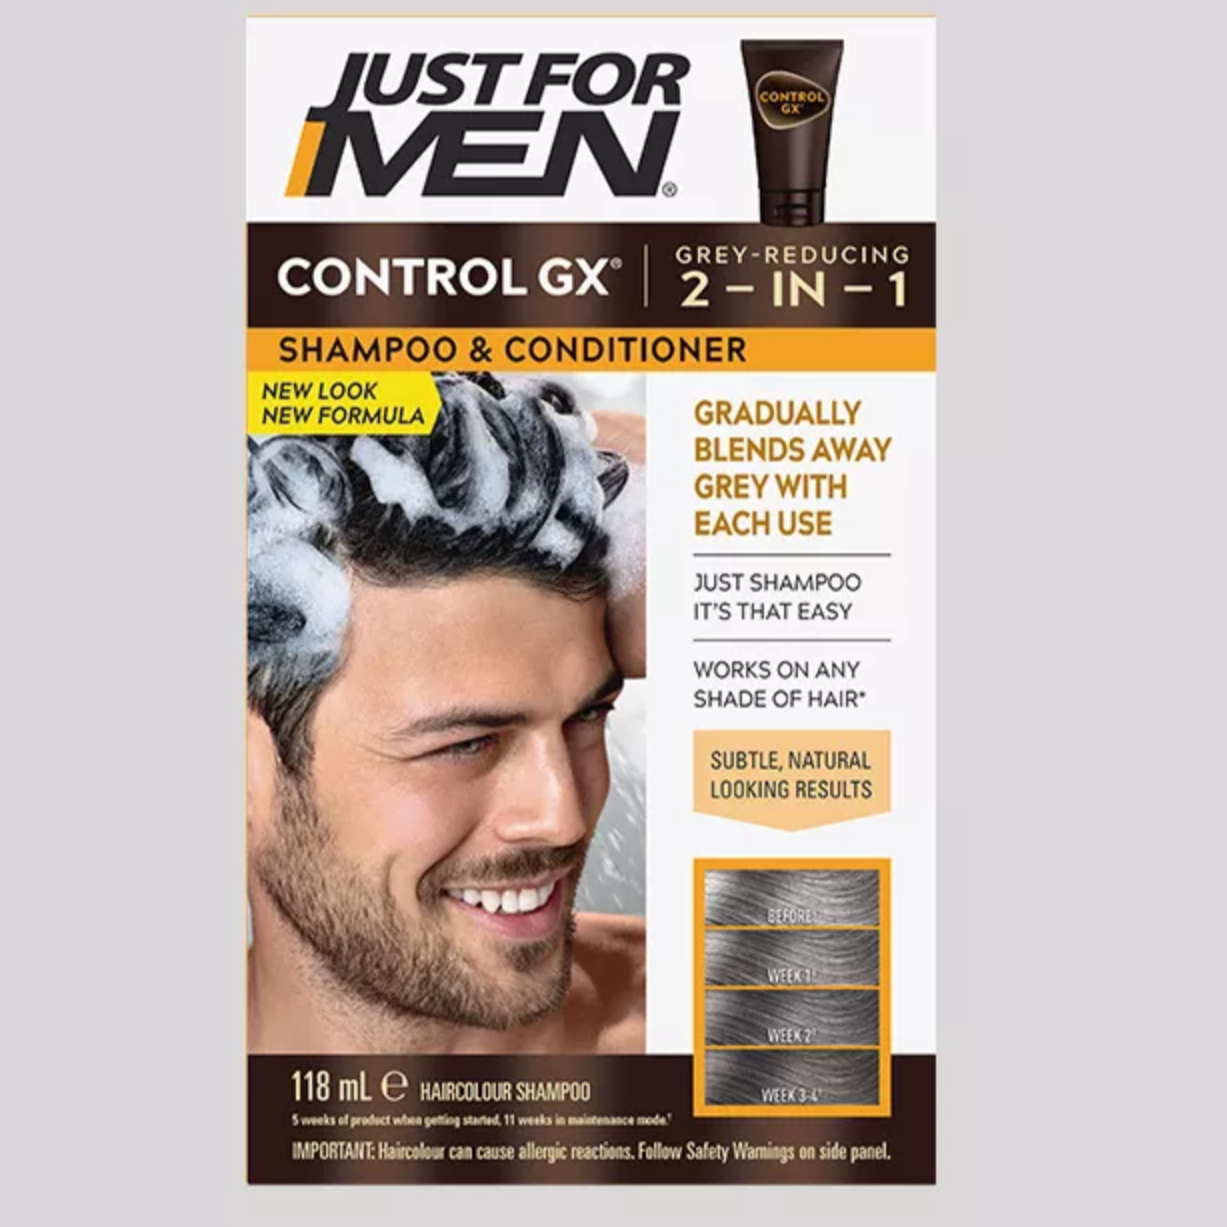 Control GX Grey Reducing 2 in 1 Shampoo and Conditioner 118ml